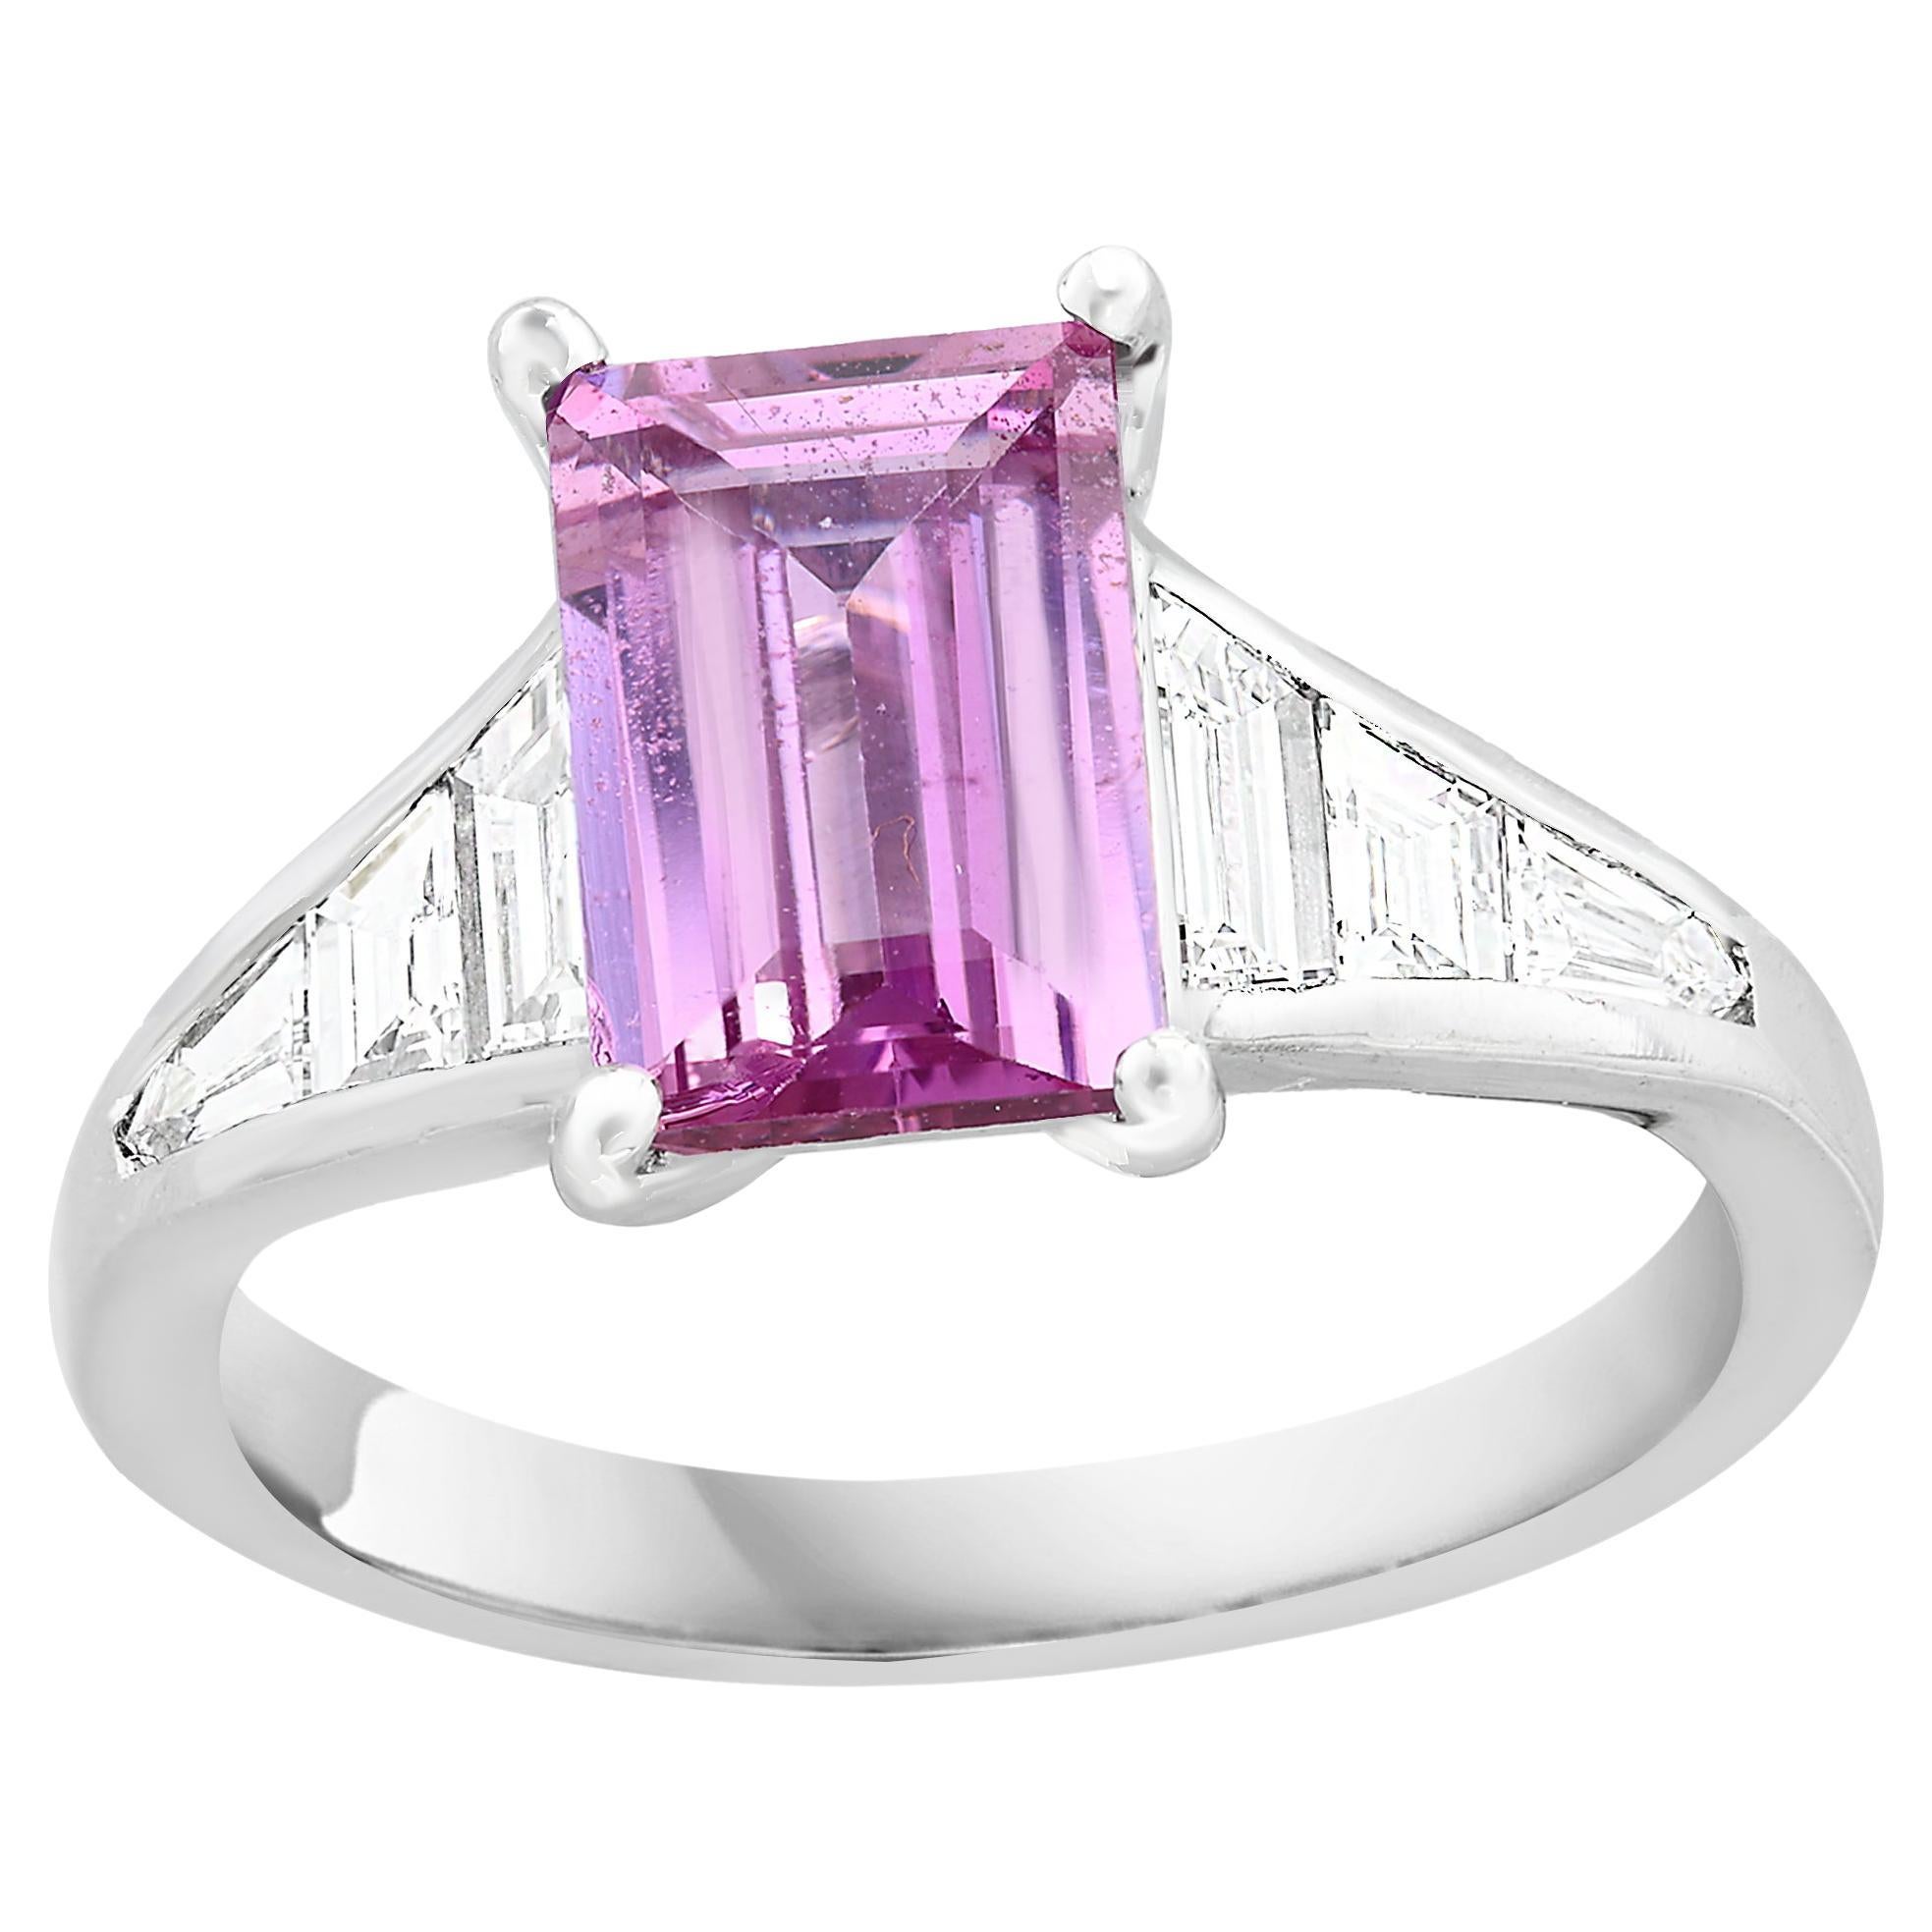 2.21 Carat Emerald Cut Pink Sapphire and Diamond Engagement Ring in Platinum